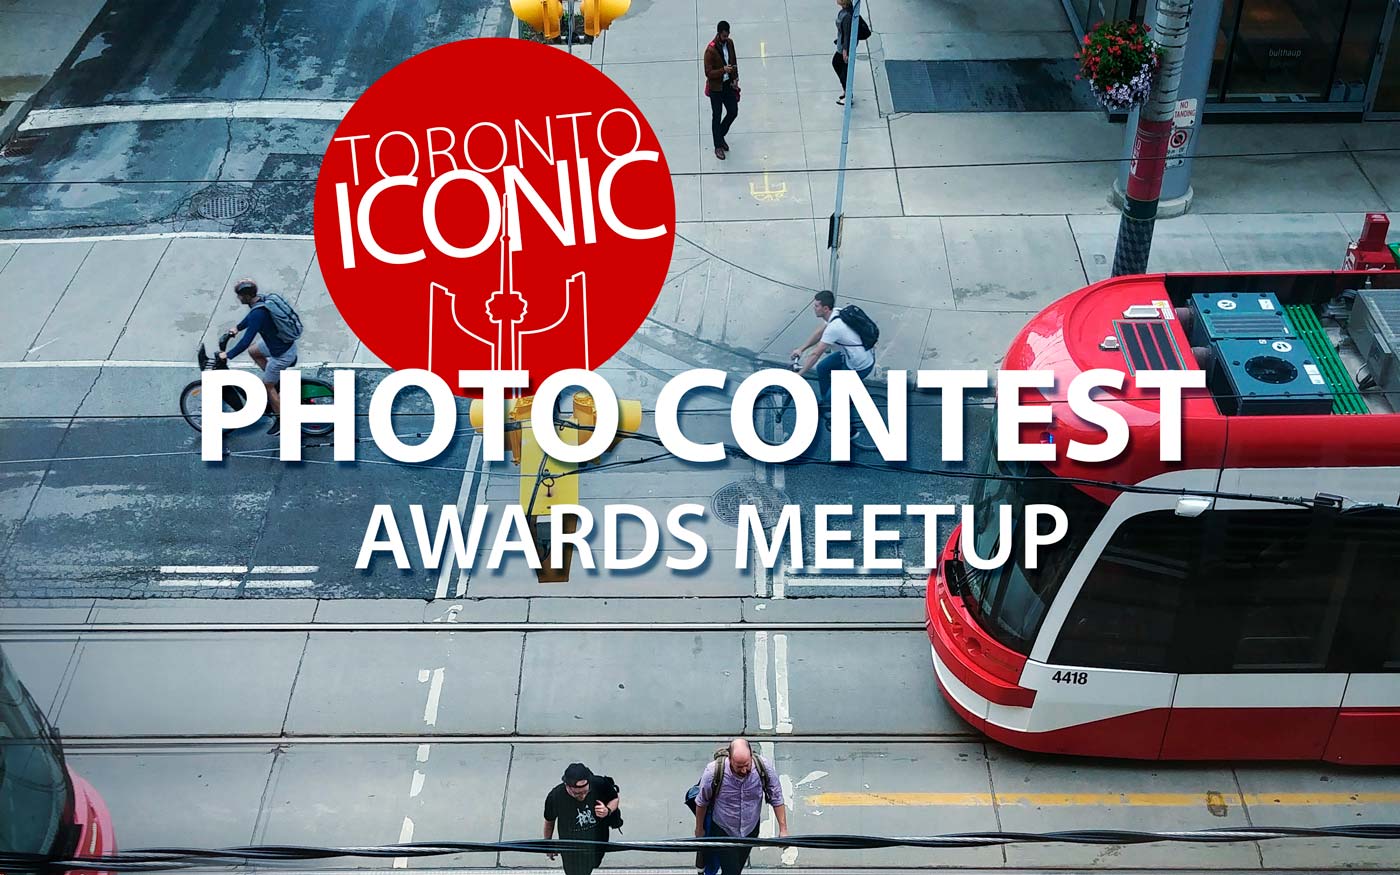 Photo Contest and Awards Meetup by Tdot Shots and Iconic Toronto